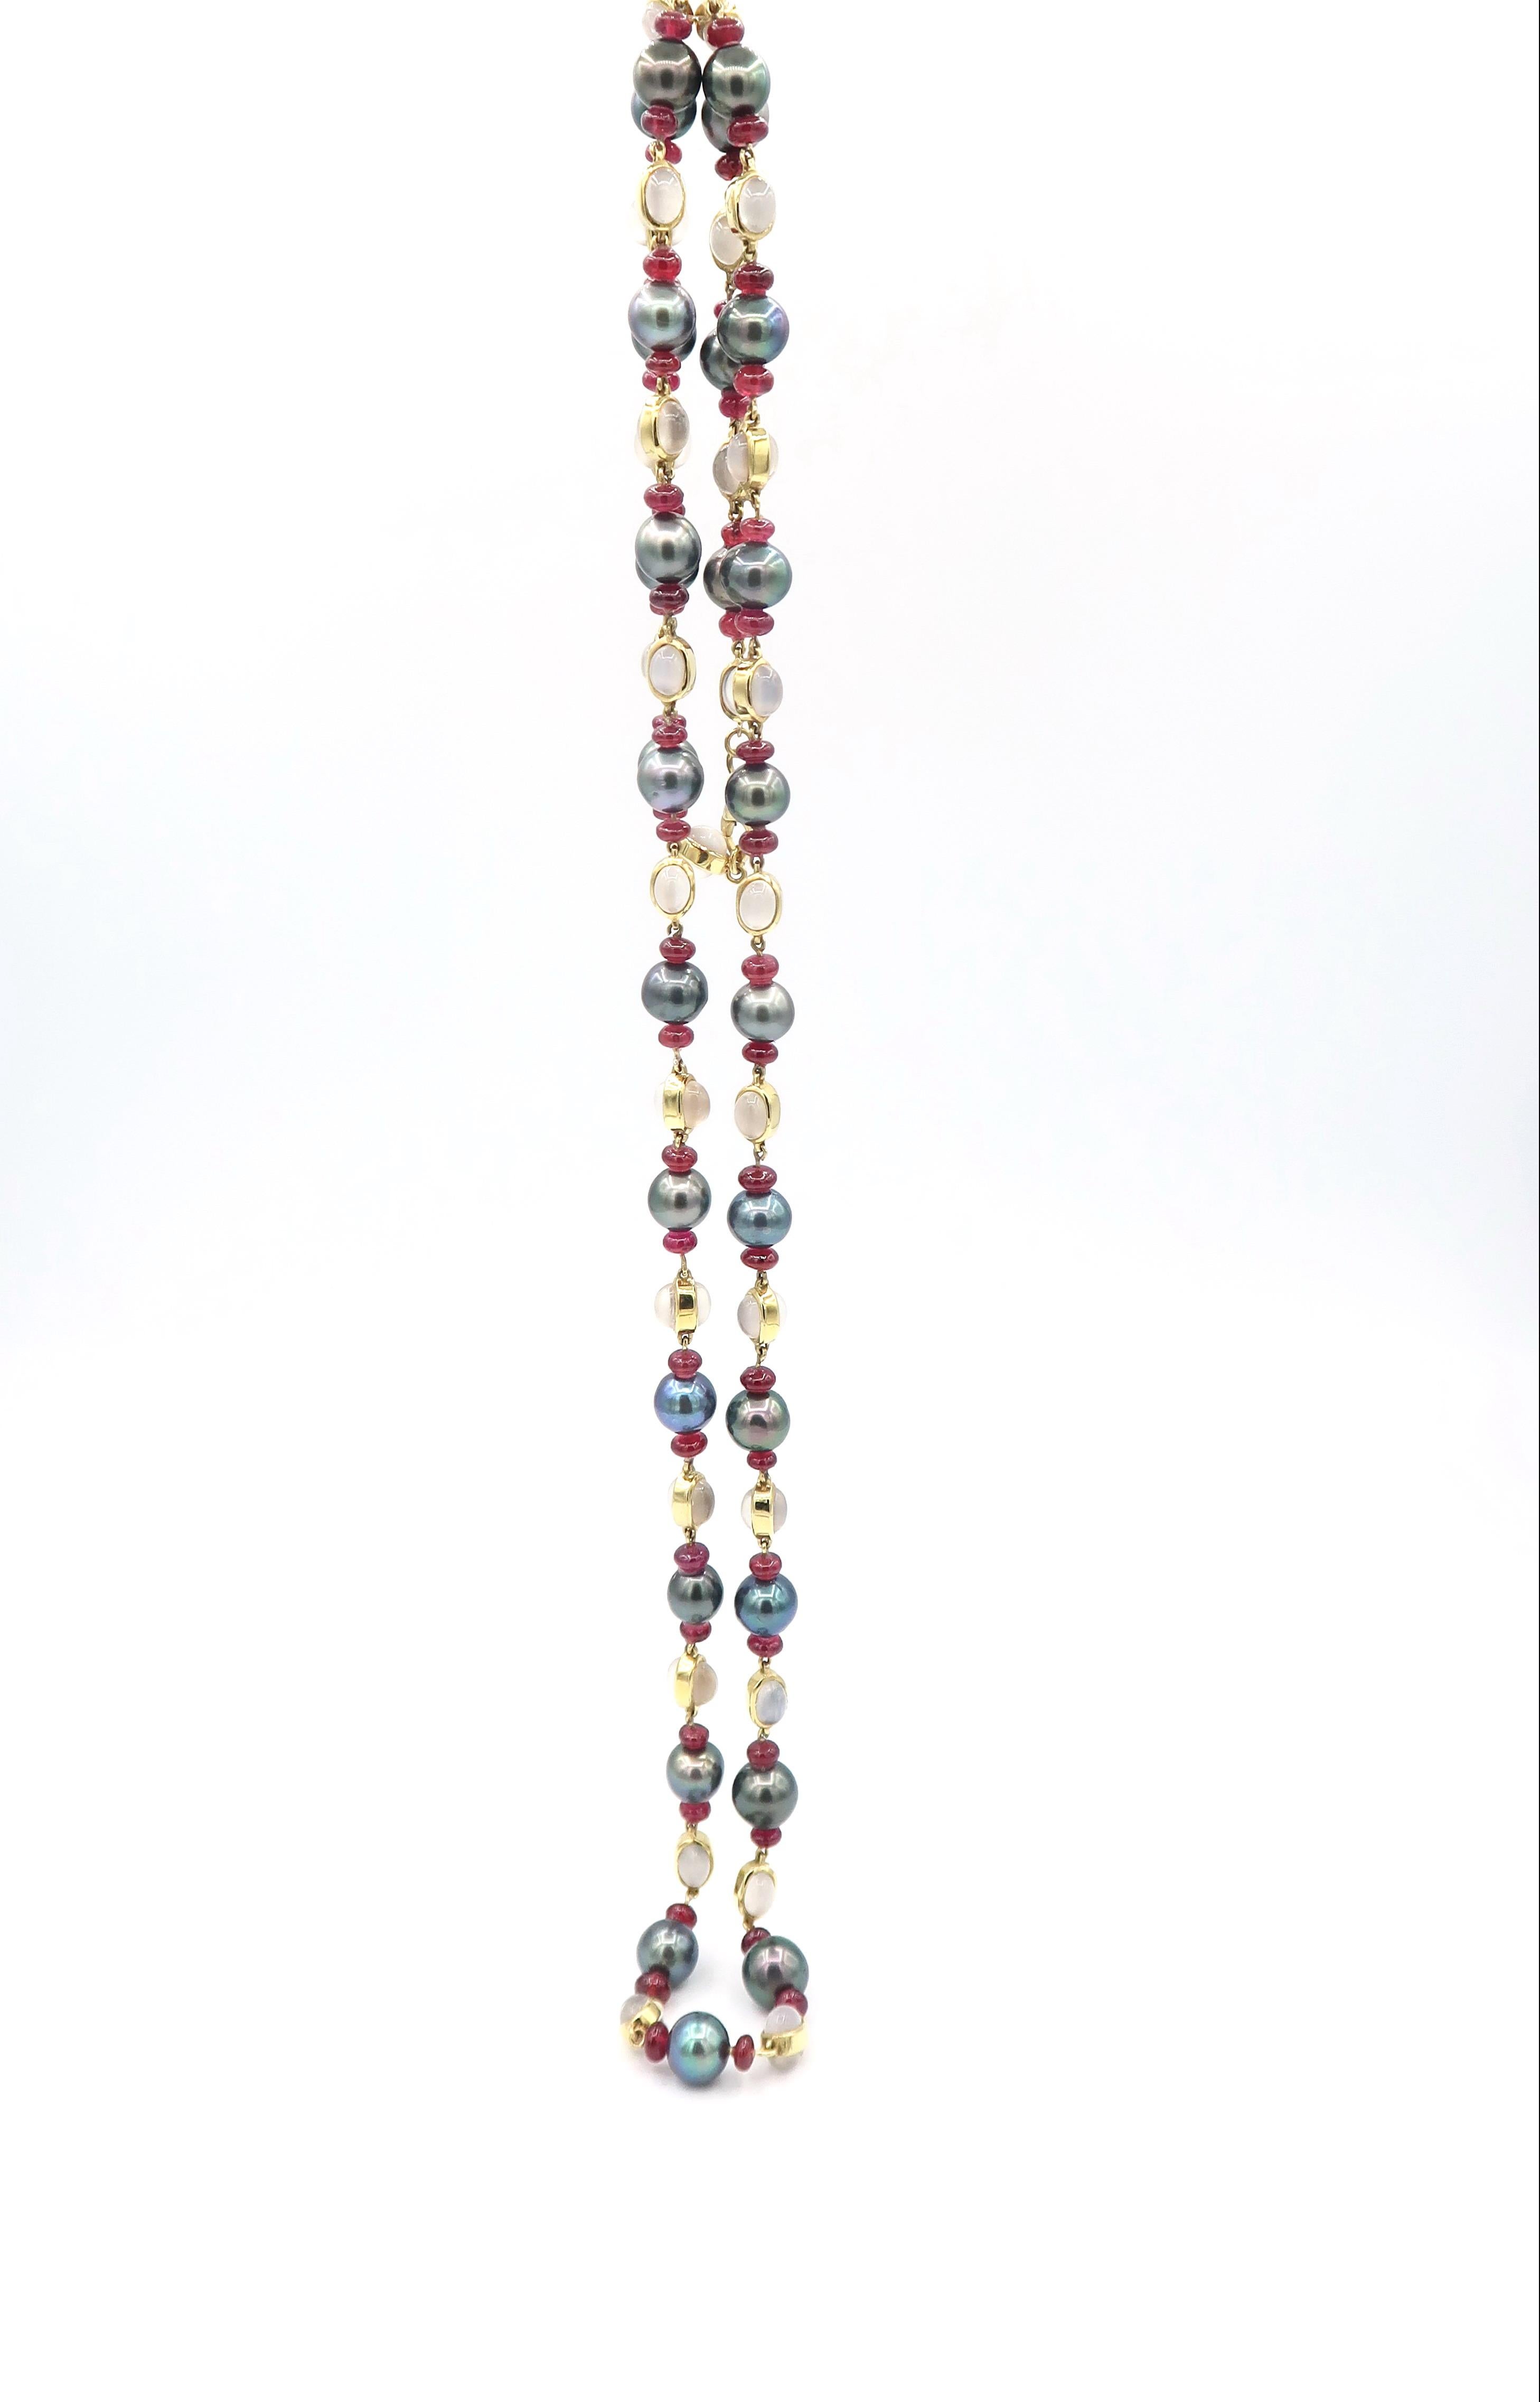 Long Strand Necklace with Pearl, Ruby, and Cabochon Moonstone set in 18K Gold Setting

Gold: 18K Yellow Gold 15.58g.
Ruby: 56cts.
Moonstone: 46.48cts.
Pearls: 28 pcs
Length: 35